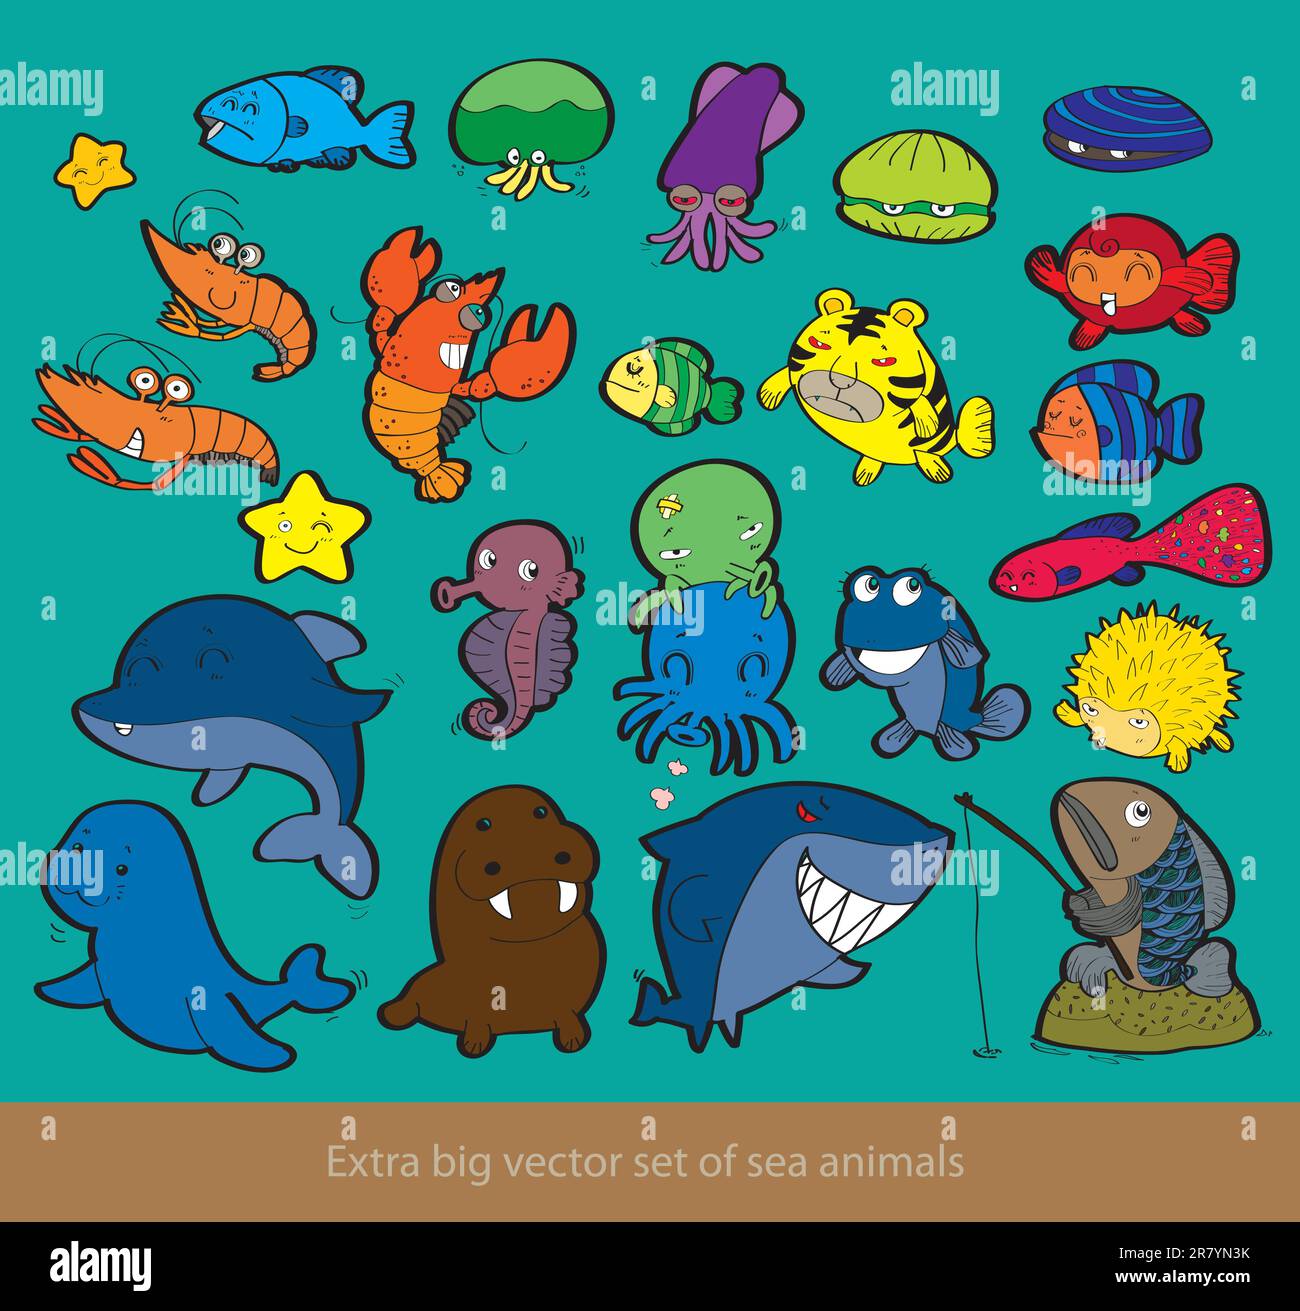 sea animals. Funny cartoon and vector isolated characters Stock Vector